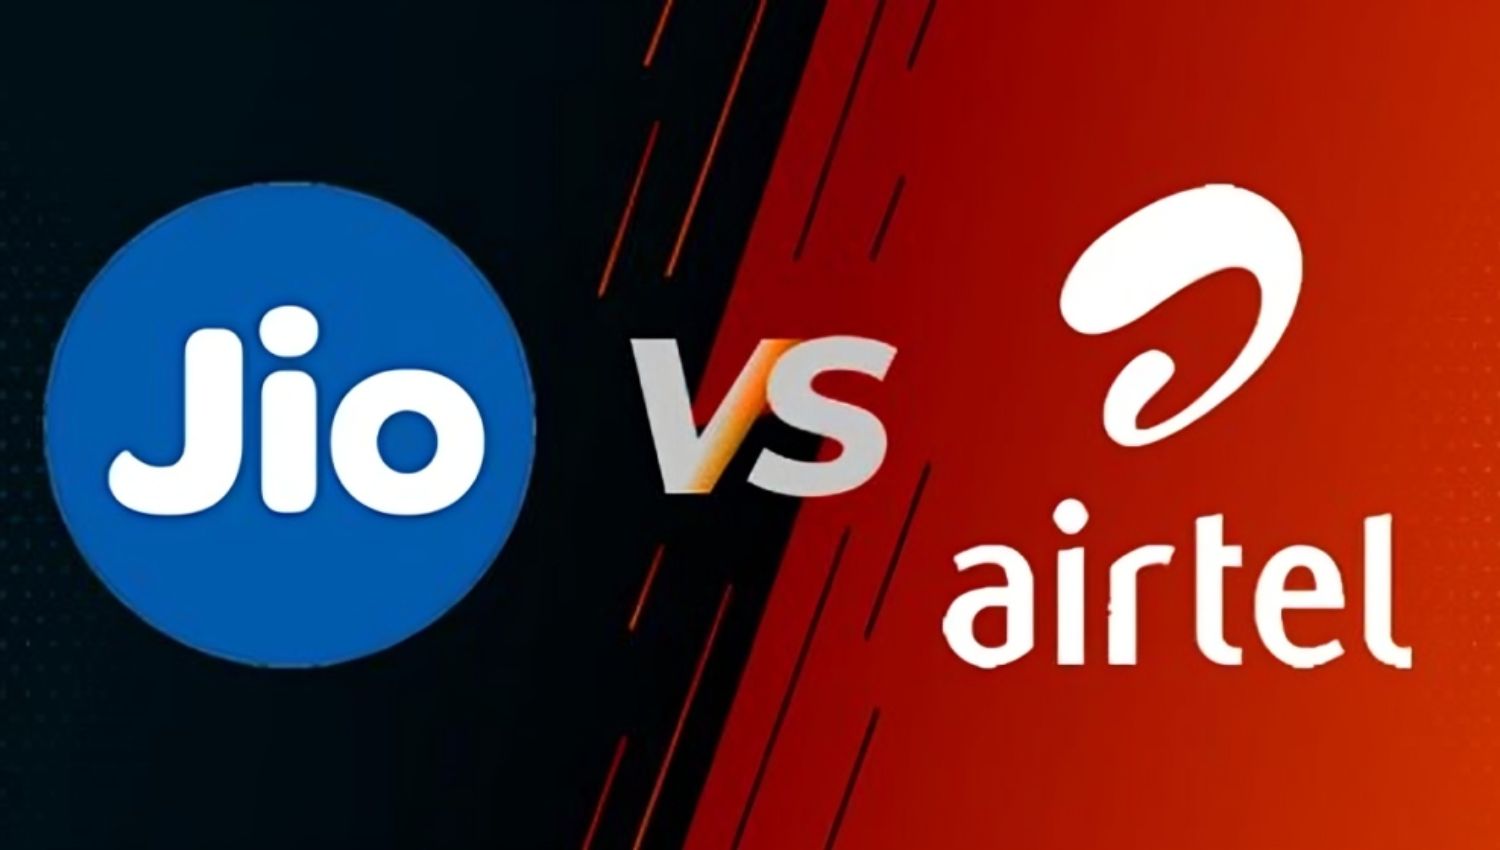 “Jio vs Airtel: Comparing Annual Prepaid Plans with Unlimited Internet, OTT Benefits, and More”